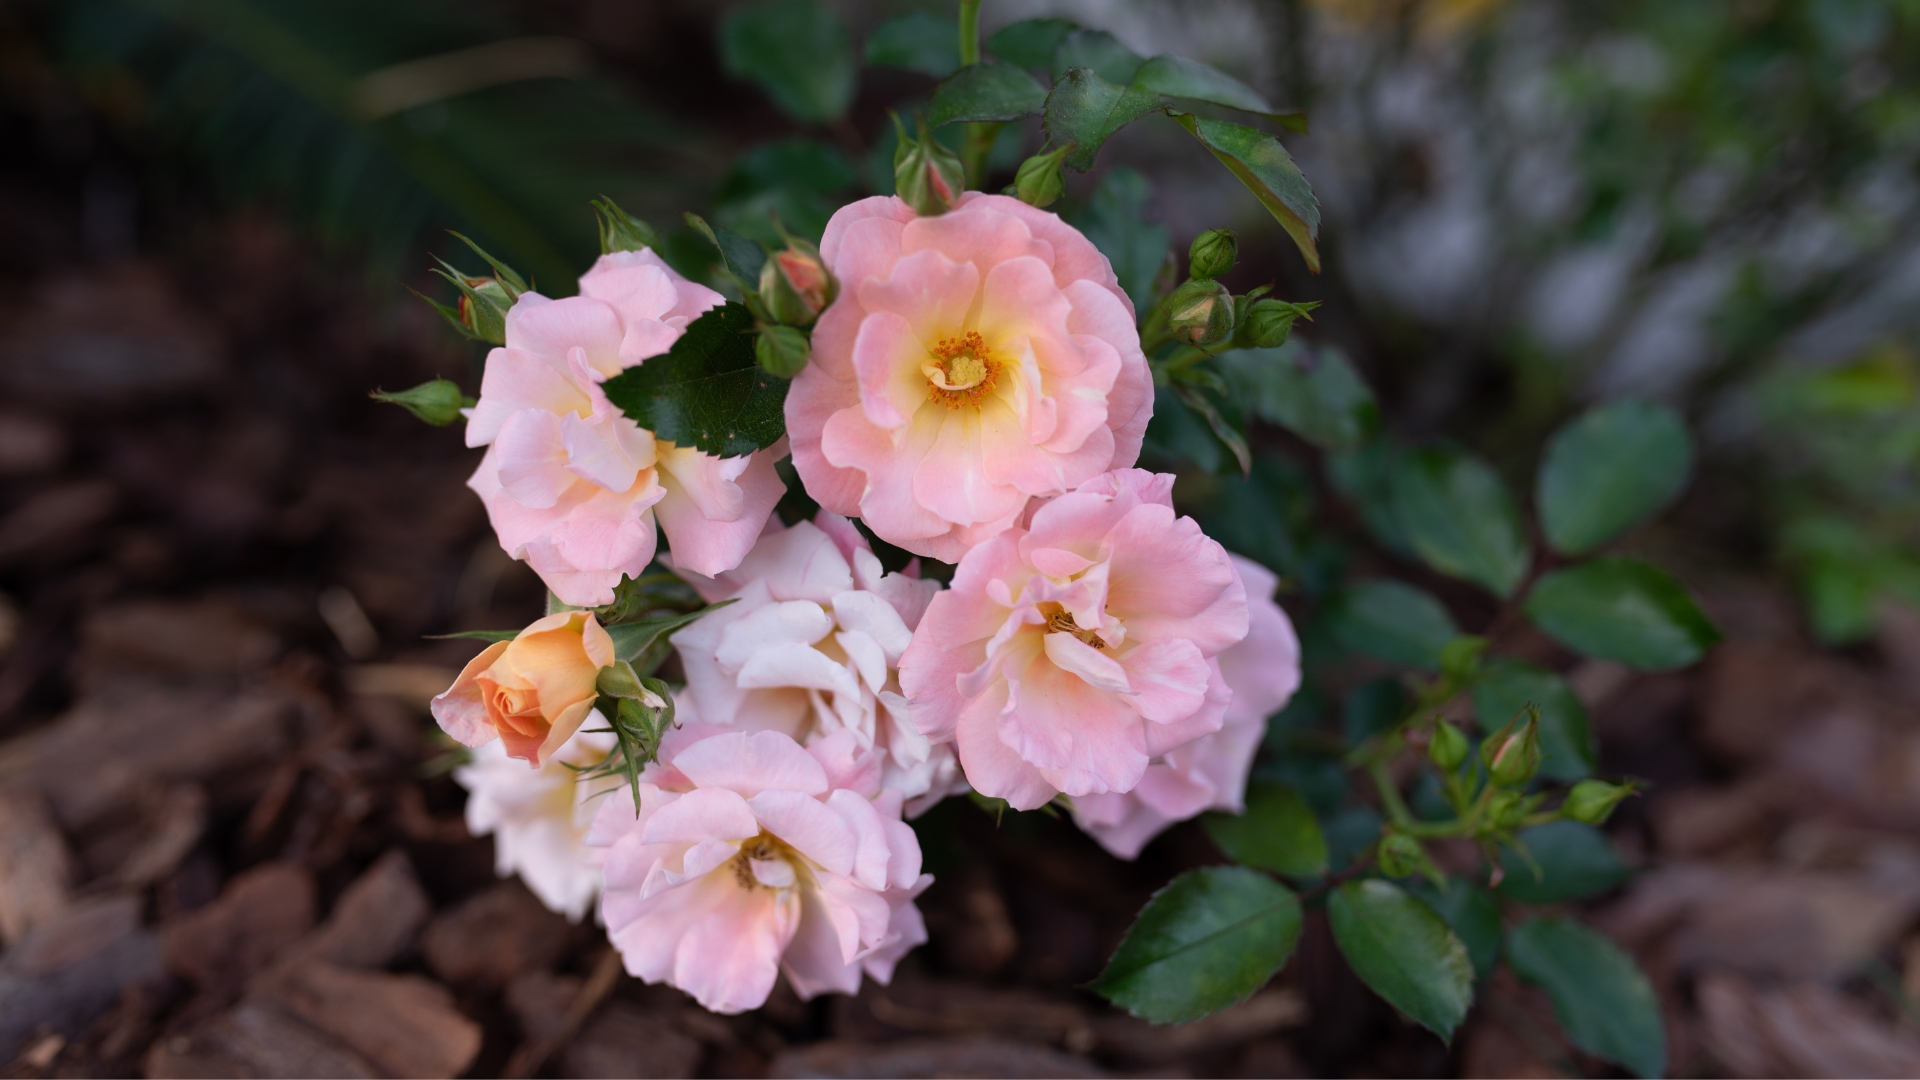 When To Prune Drift Roses And How To Do It Properly